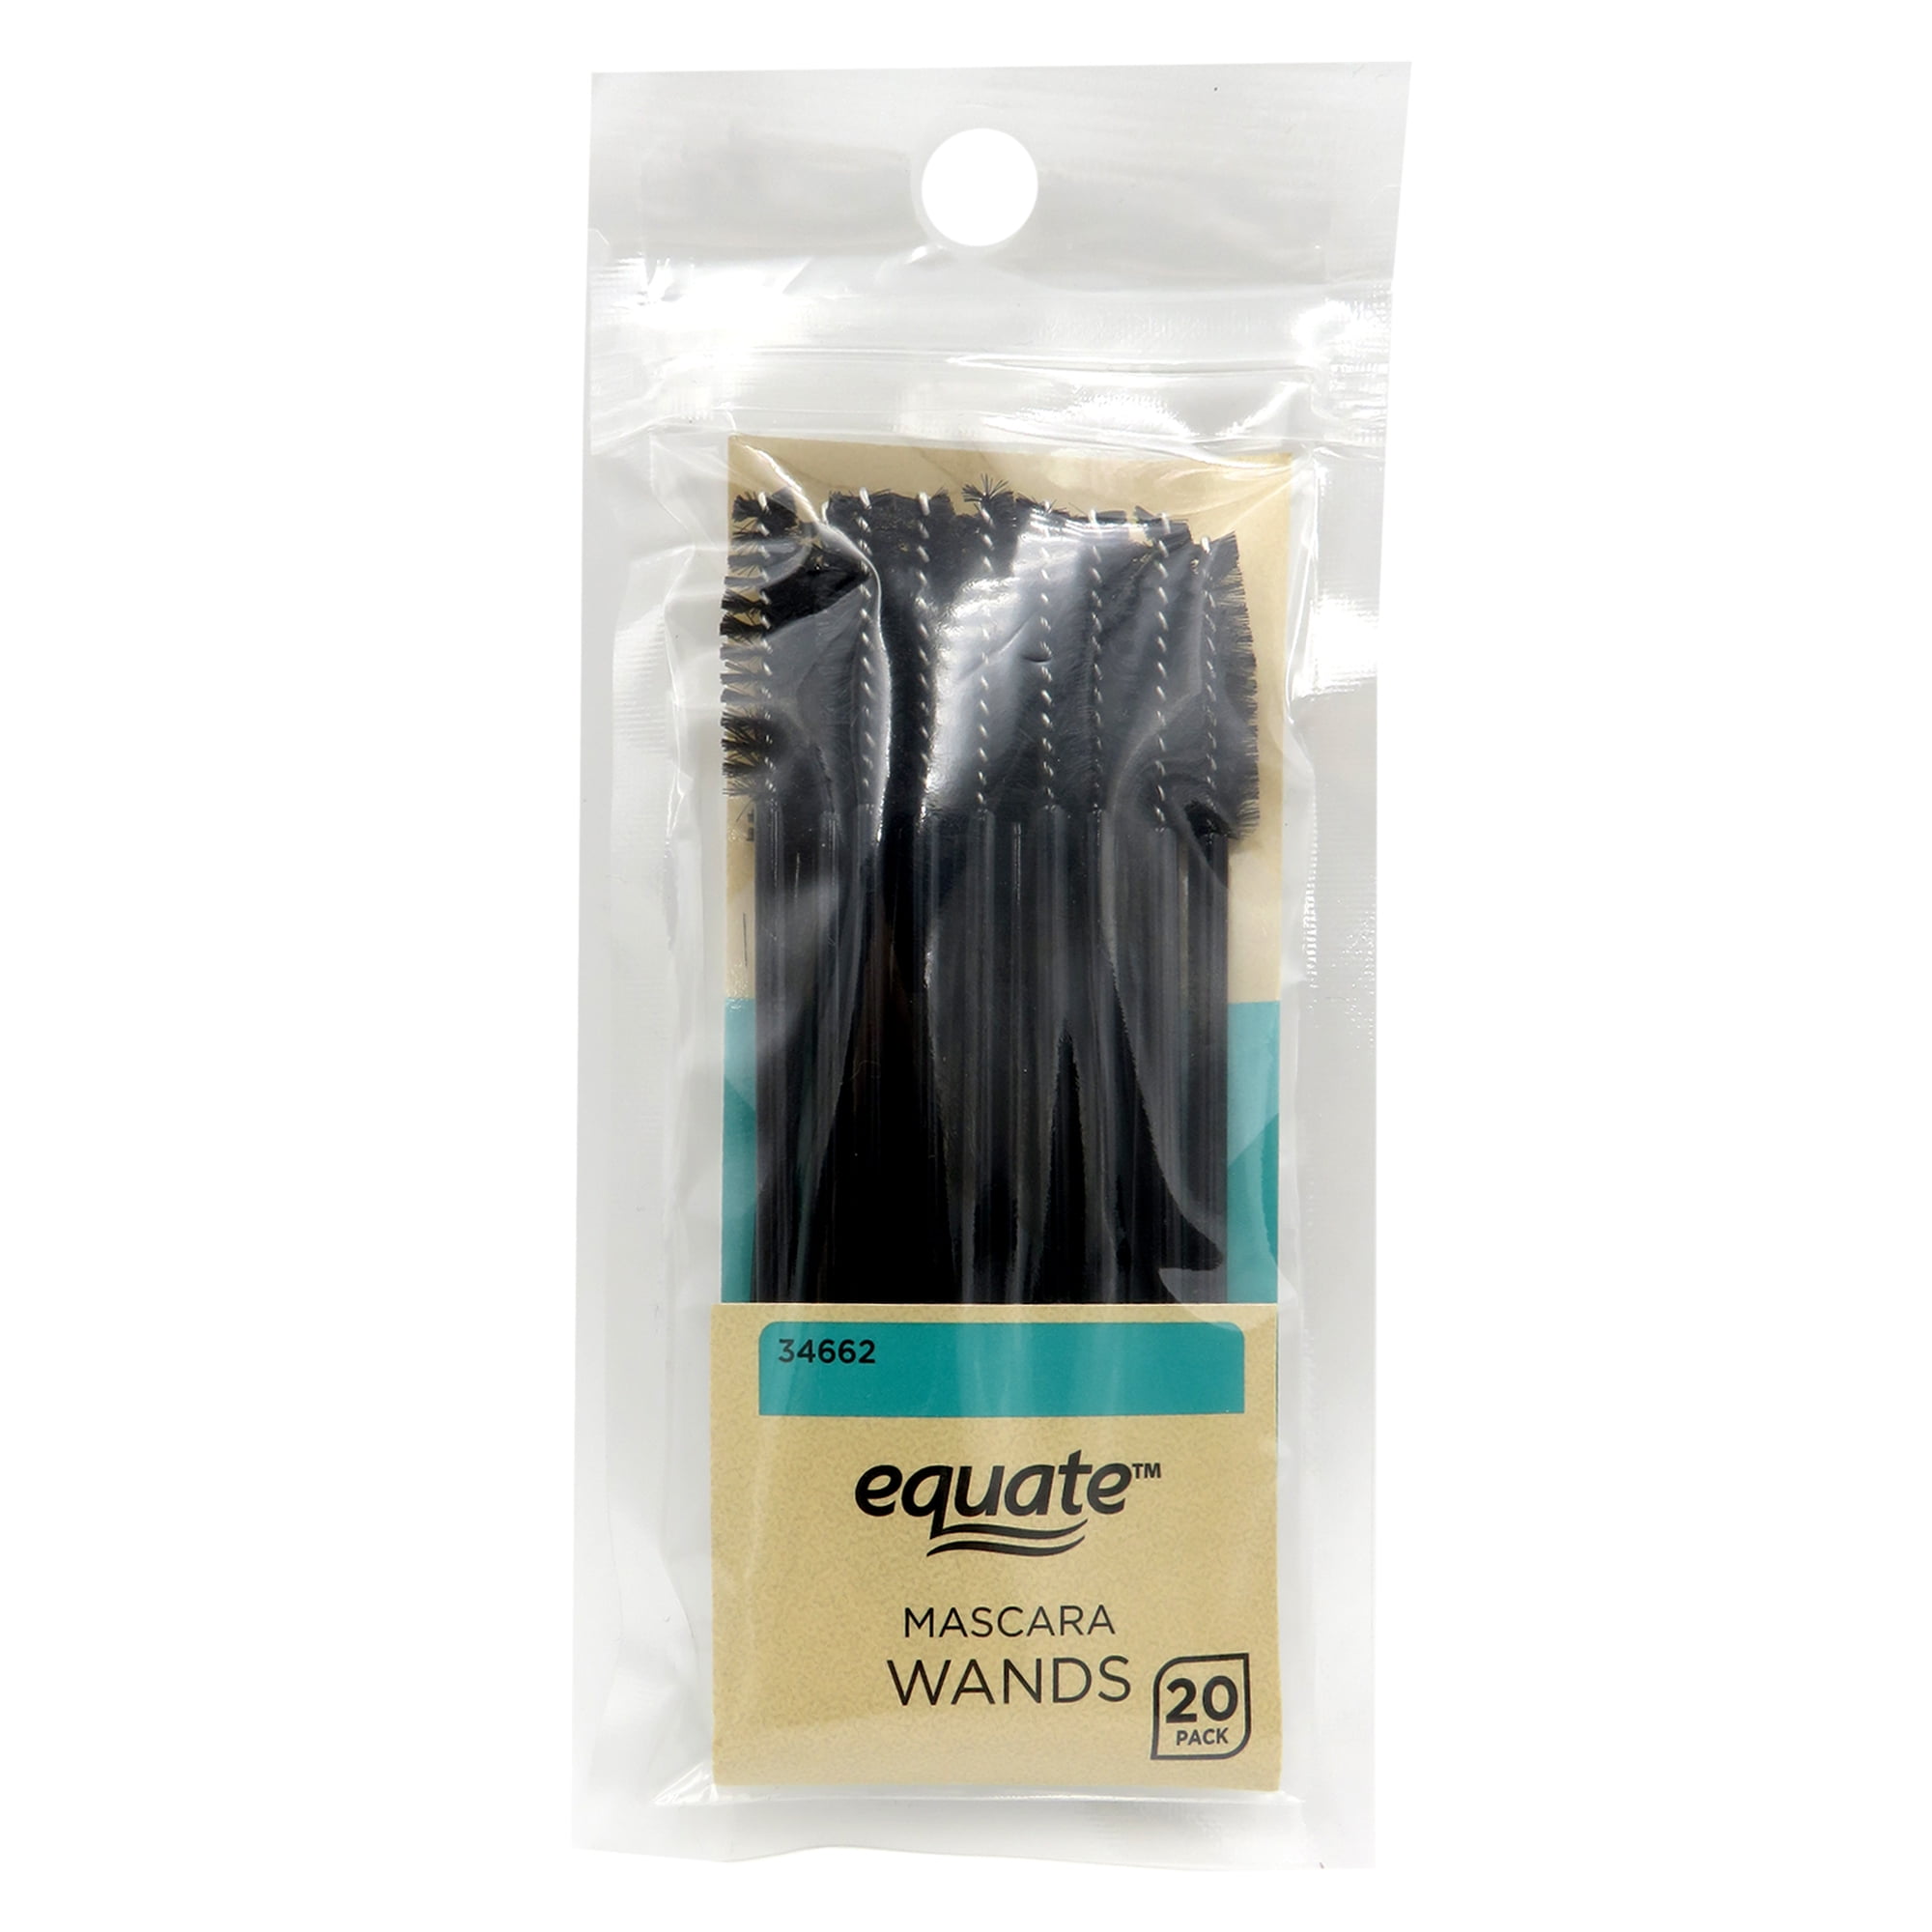 Equate Mascara Wands, Pack of 20, Great For Eyebrow Grooming, Root Touch-Ups